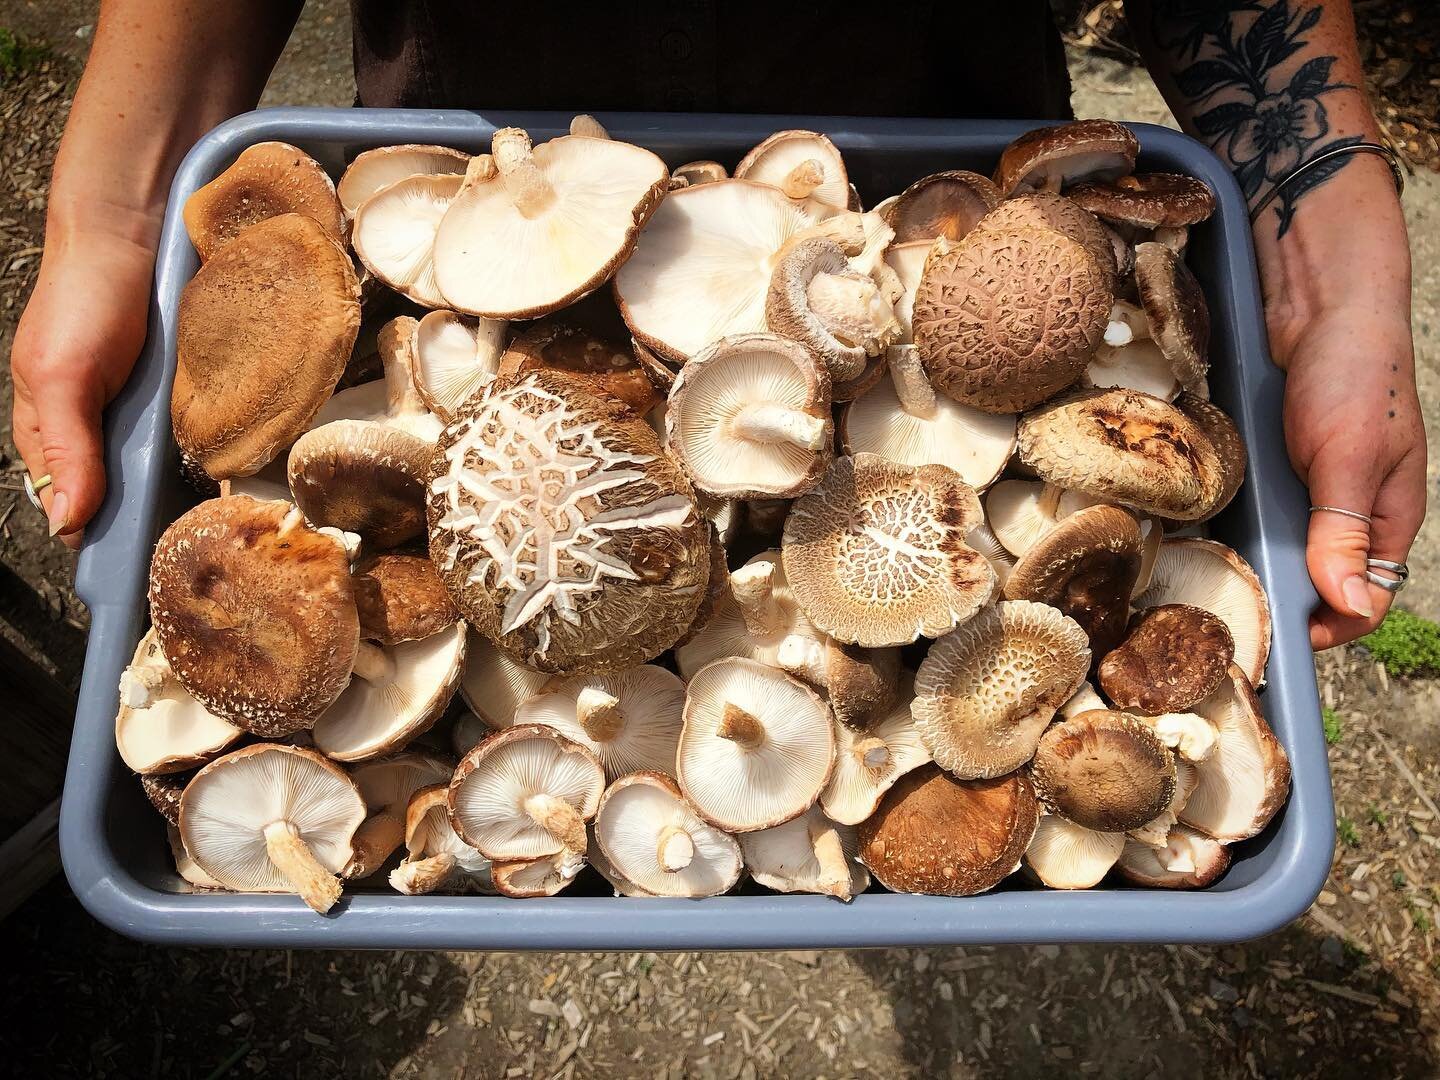 Happy Sol-day 🌞

The fridge at the @gvfam Marketplace is stocked with our beautiful, log grown shiitake fresh from the forest!

The marketplace also has other amazing herbal/culinary goodies, local art, organic cotton clothing and much more. If you 